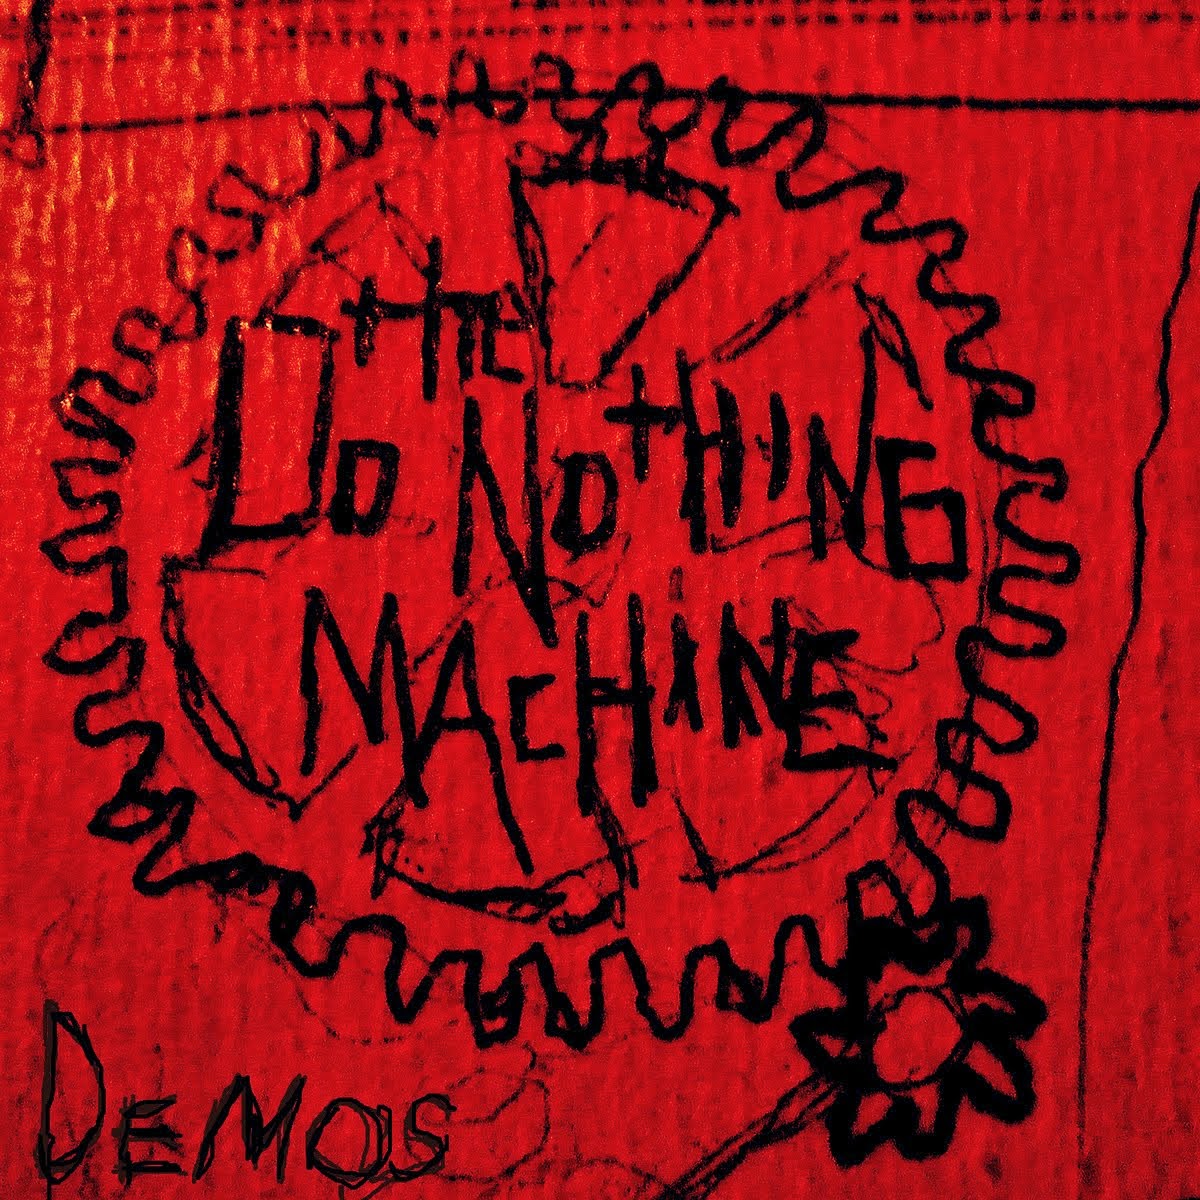 The Do Nothing Machine: Demos (2 Songs) 2001